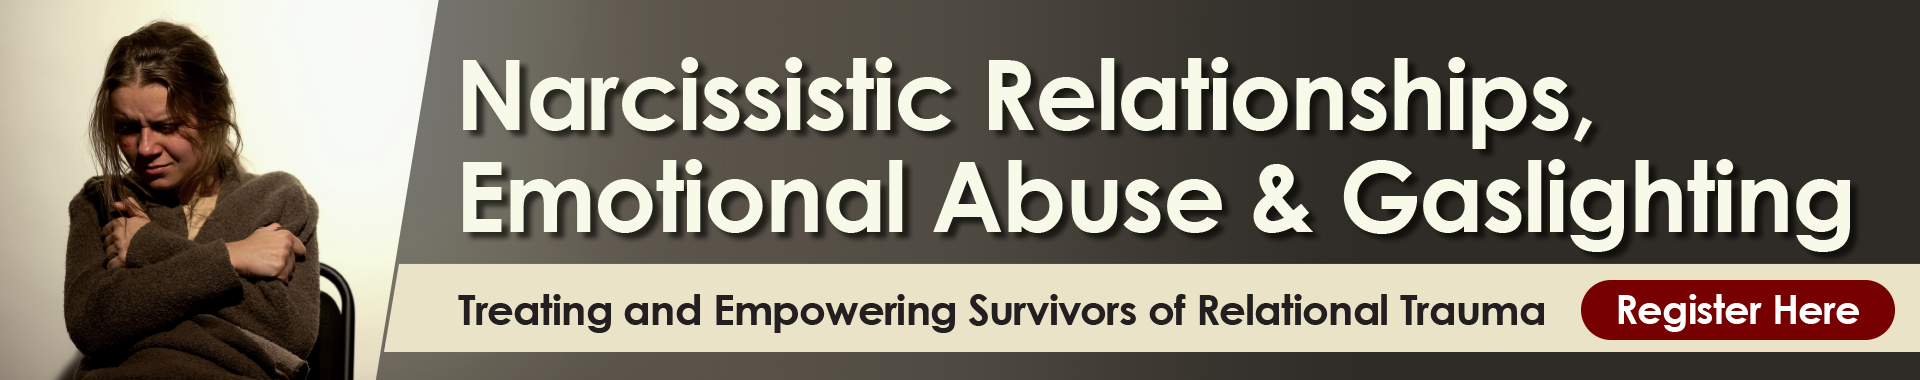 Narcissistic Relationships, Emotional Abuse & Gaslighting: Treating and Empowering Survivors of Relational Trauma